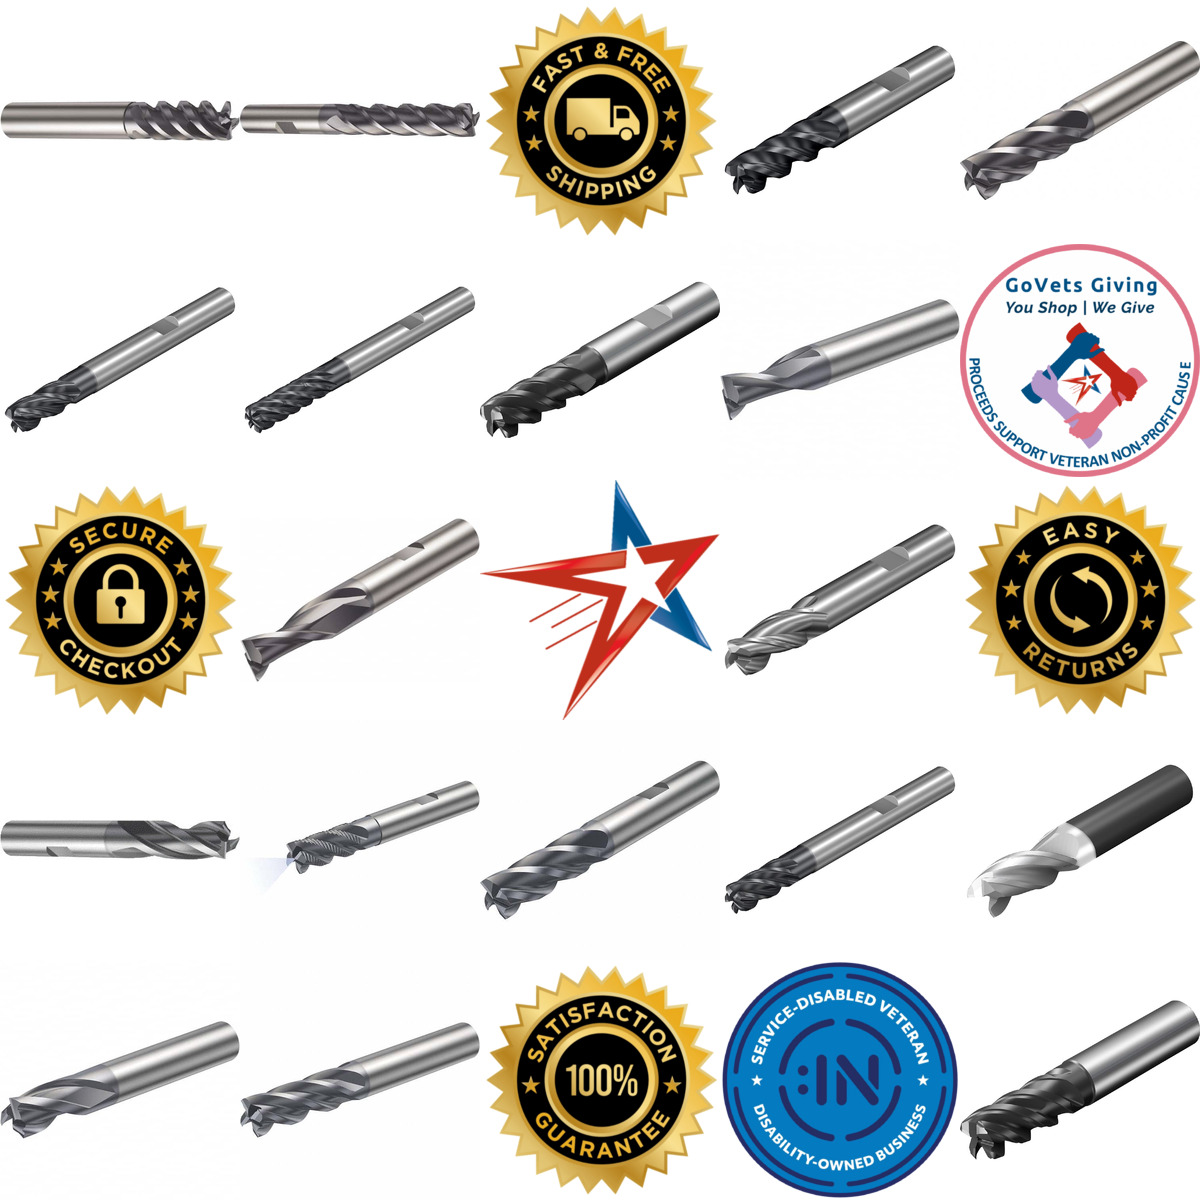 A selection of Sandvik Coromant products on GoVets